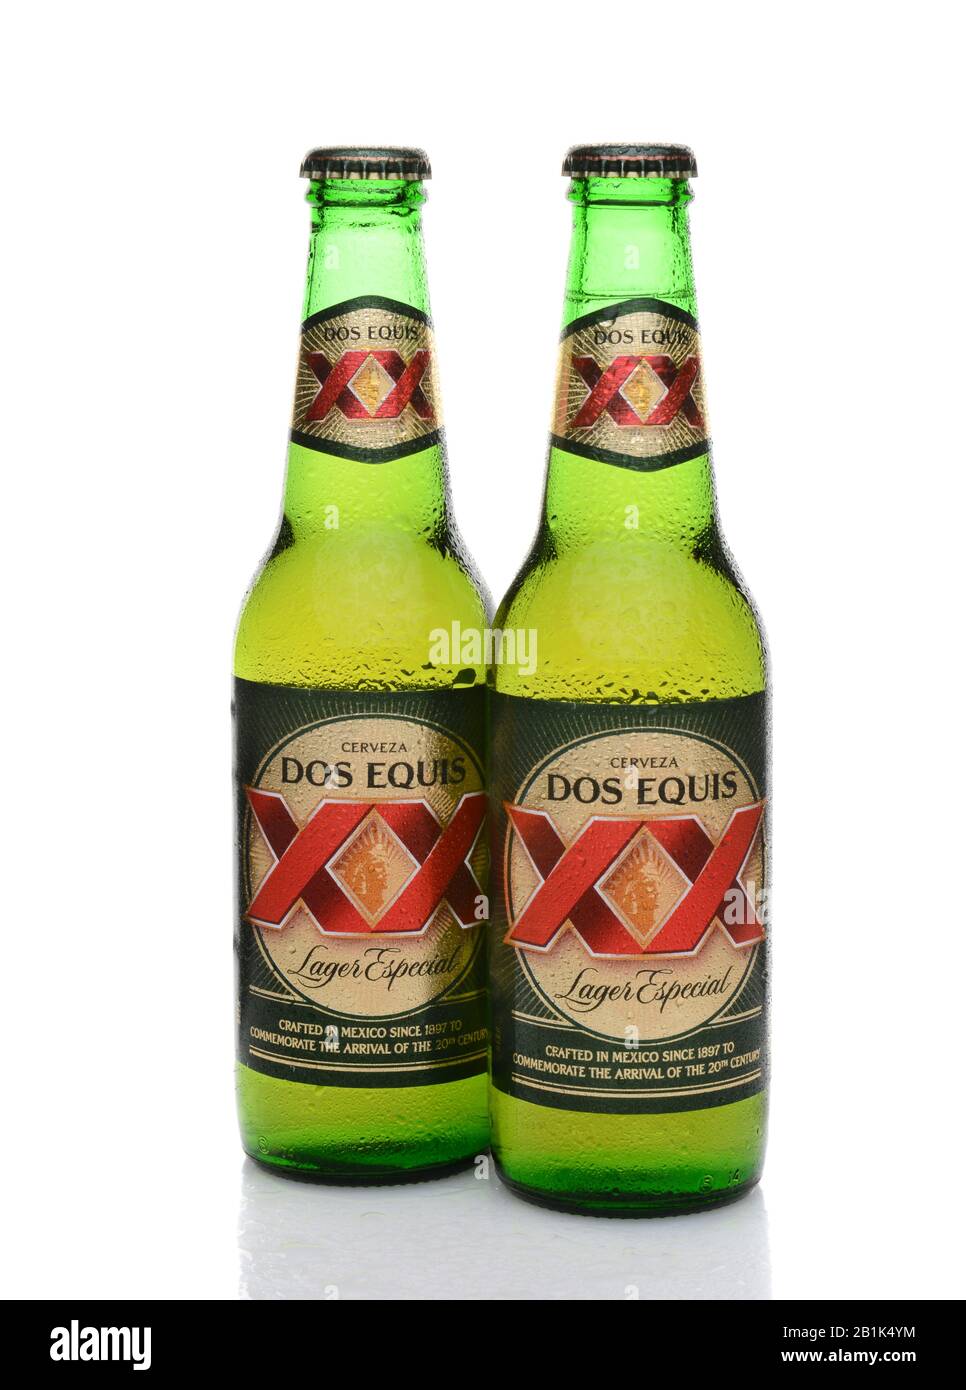 IRVINE, CA - MAY 25, 2014: Two Bottles of Dos Equis Lager Especial with condensation. Founded in 1890 from the Cuauhtemoc-Moctezuma Brewery in Monterr Stock Photo